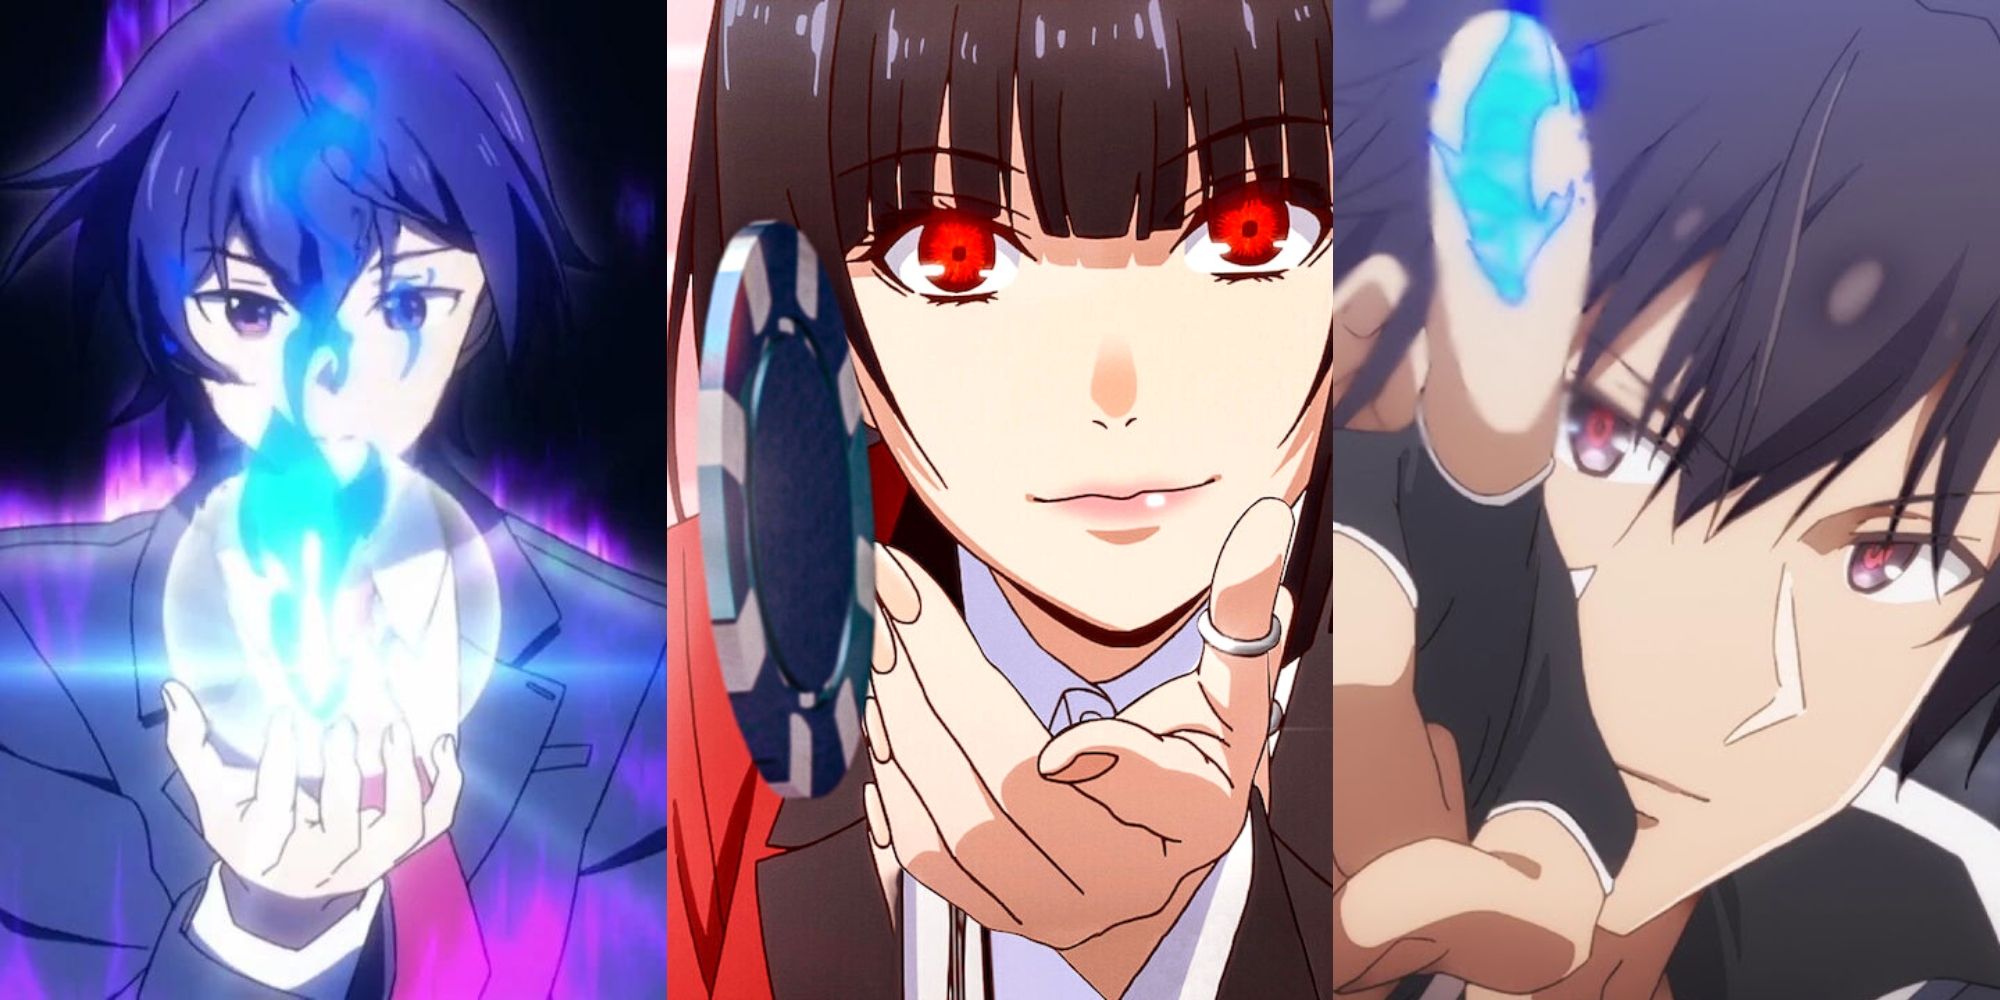 15 Anime Where the MC is an OP Transfer Student